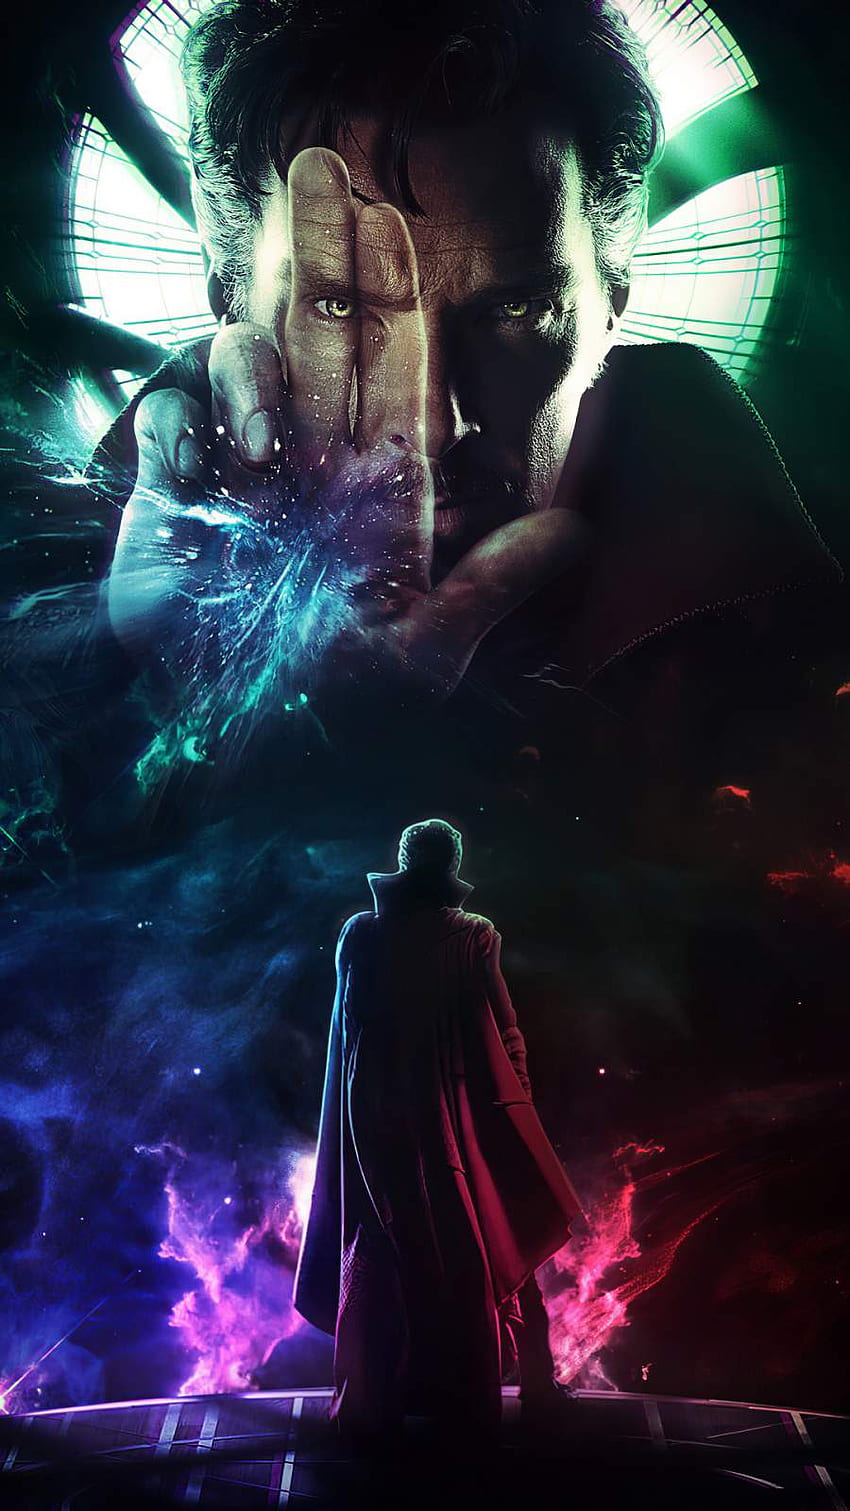 Doctor Strange Multiverse Of Madness IPhone - IPhone : iPhone , Doctor Strange di Multiverse of Madness wallpaper ponsel HD